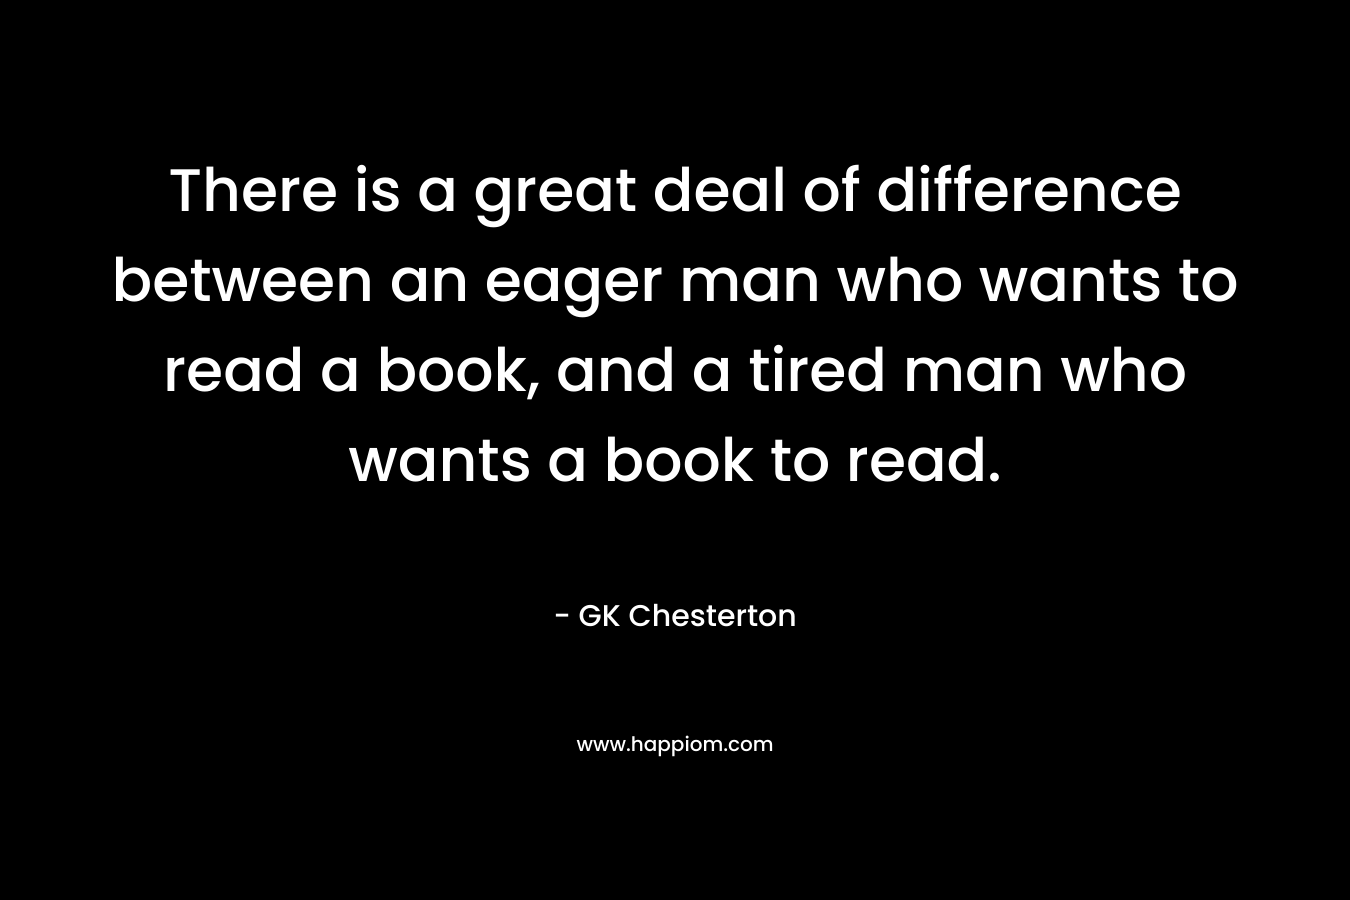 There is a great deal of difference between an eager man who wants to read a book, and a tired man who wants a book to read.